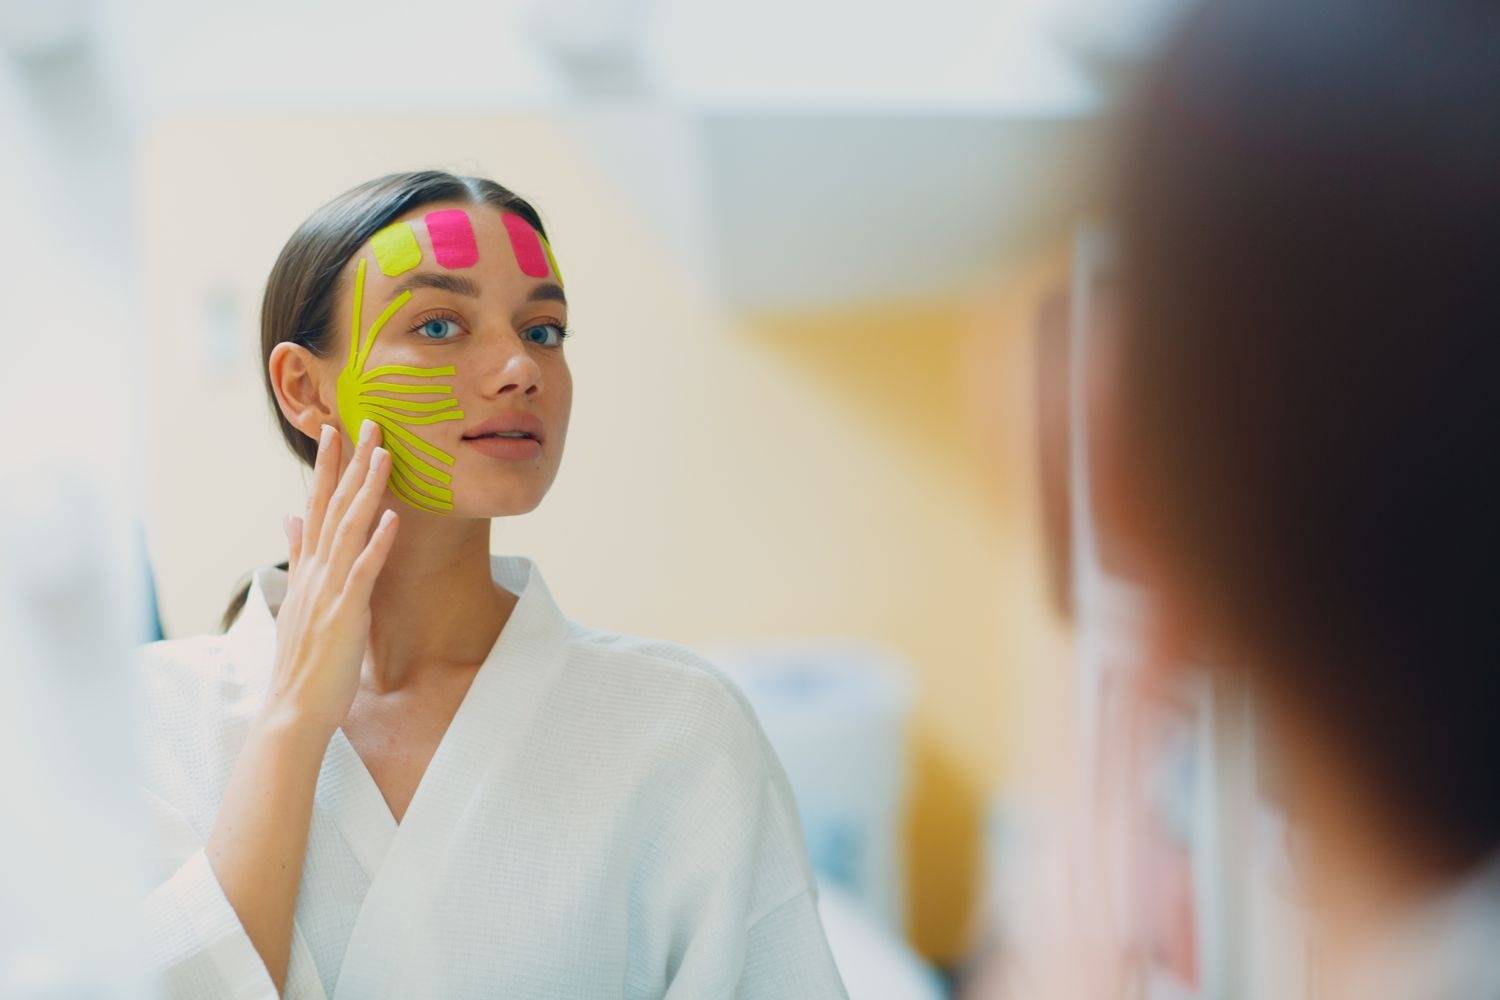 Debunking the Face-Taping Trend: Experts Weigh In on Its Effectiveness for Wrinkle Reduction